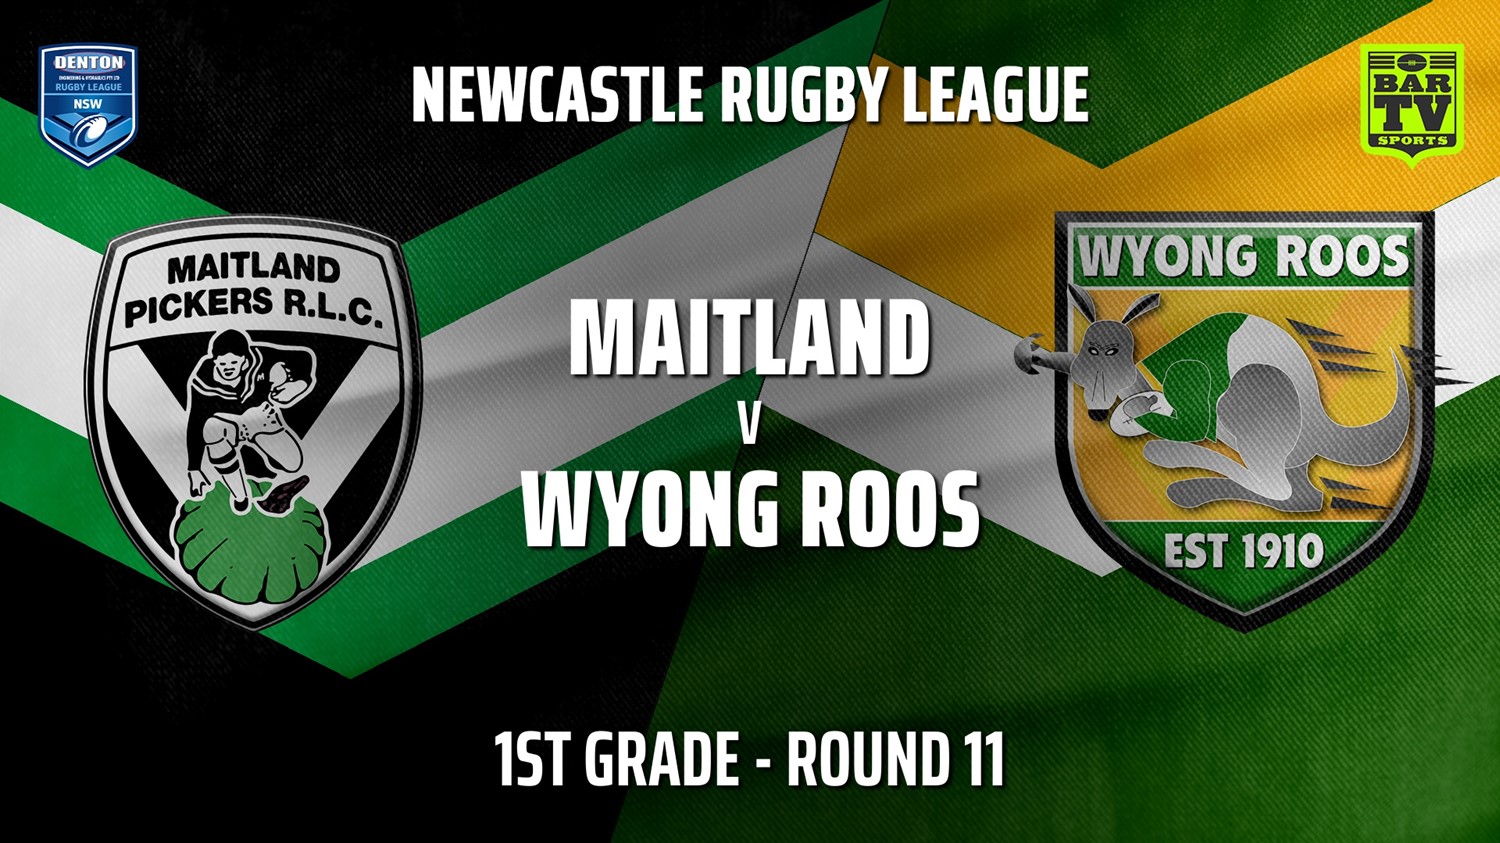 210612-Newcastle Round 11 - 1st Grade - Maitland Pickers v Wyong Roos Minigame Slate Image